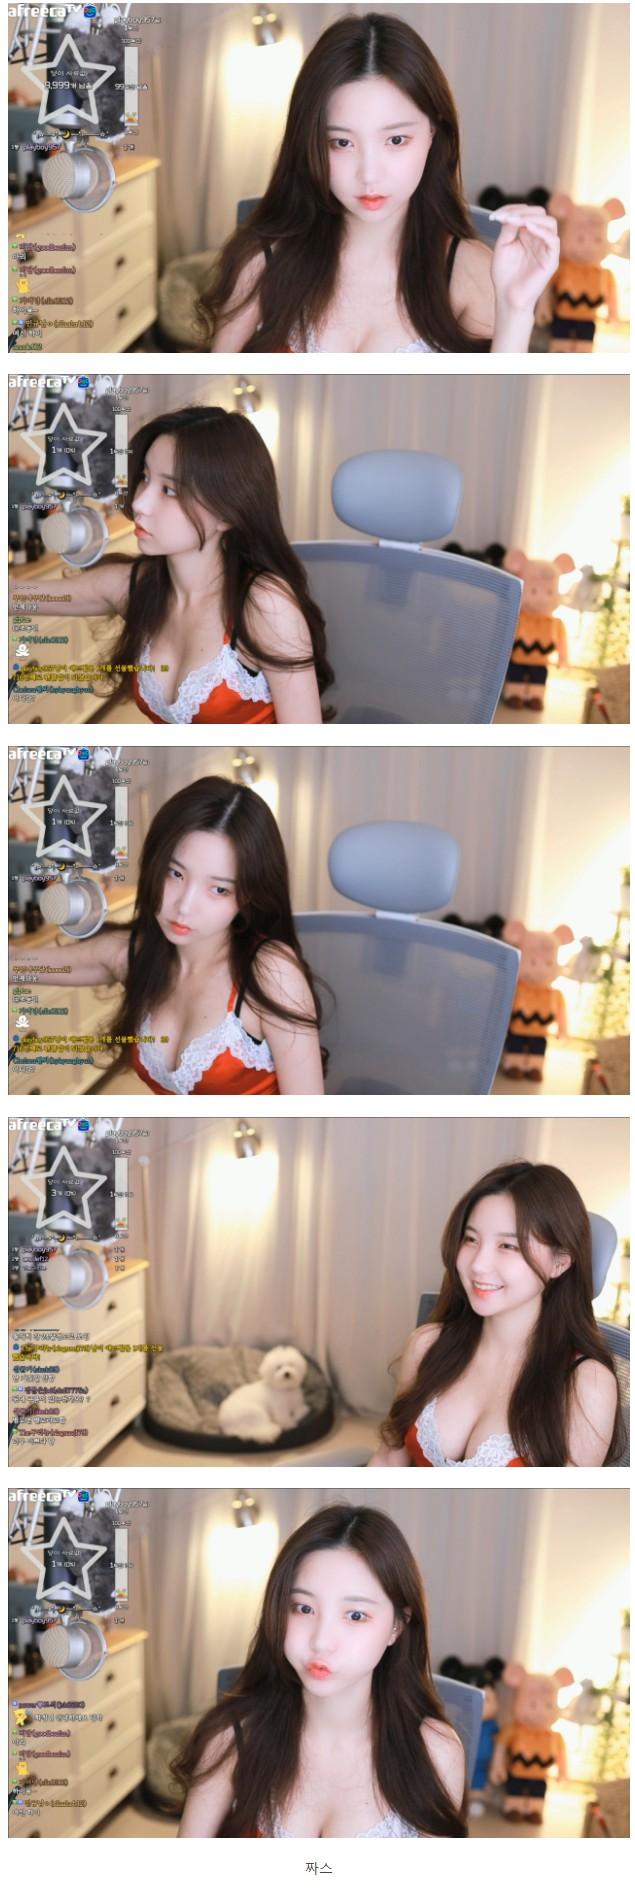 BJ Hwajeong wore red slip lingerie and was in a women's cam mode for the first time in a while